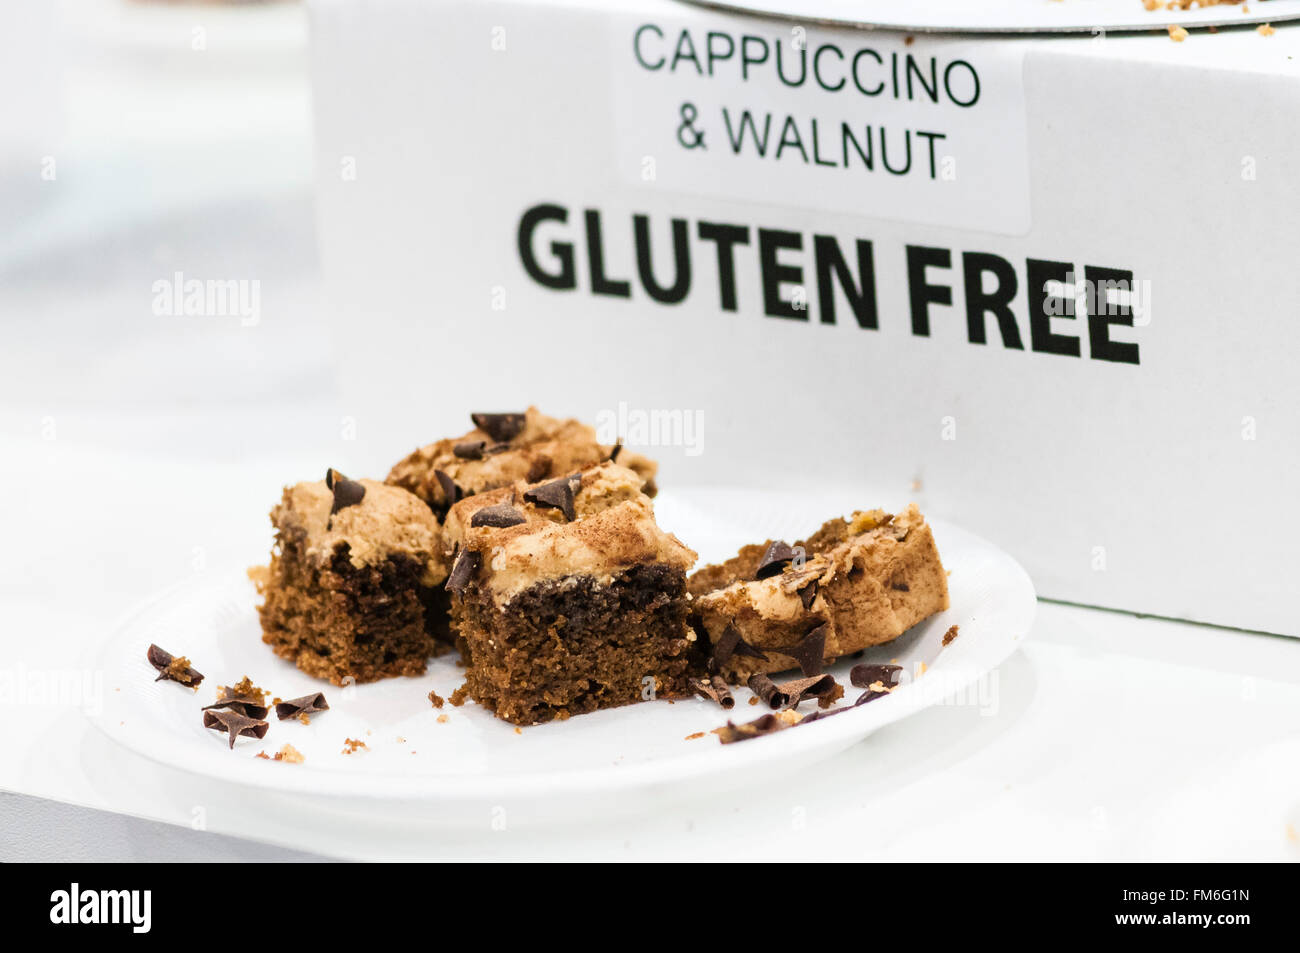 Gluten Free Cappuccino and Walnut Cake on sale in an up-market cafe. Stock Photo